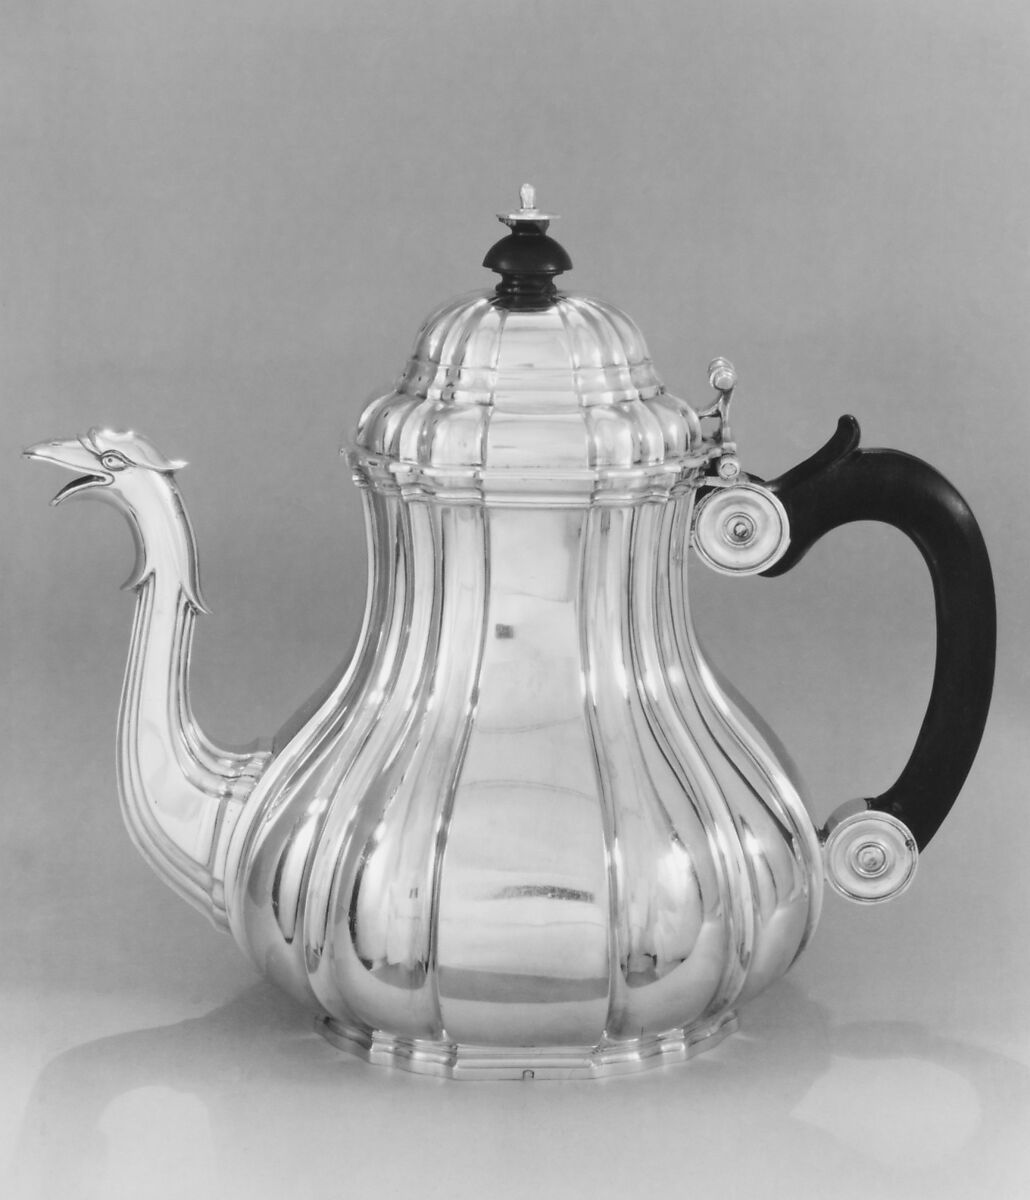 Teapot, Barthélemy Decourchelle (French, active Lille, master 1726, active 1761), Silver; ebony, French, Lille 